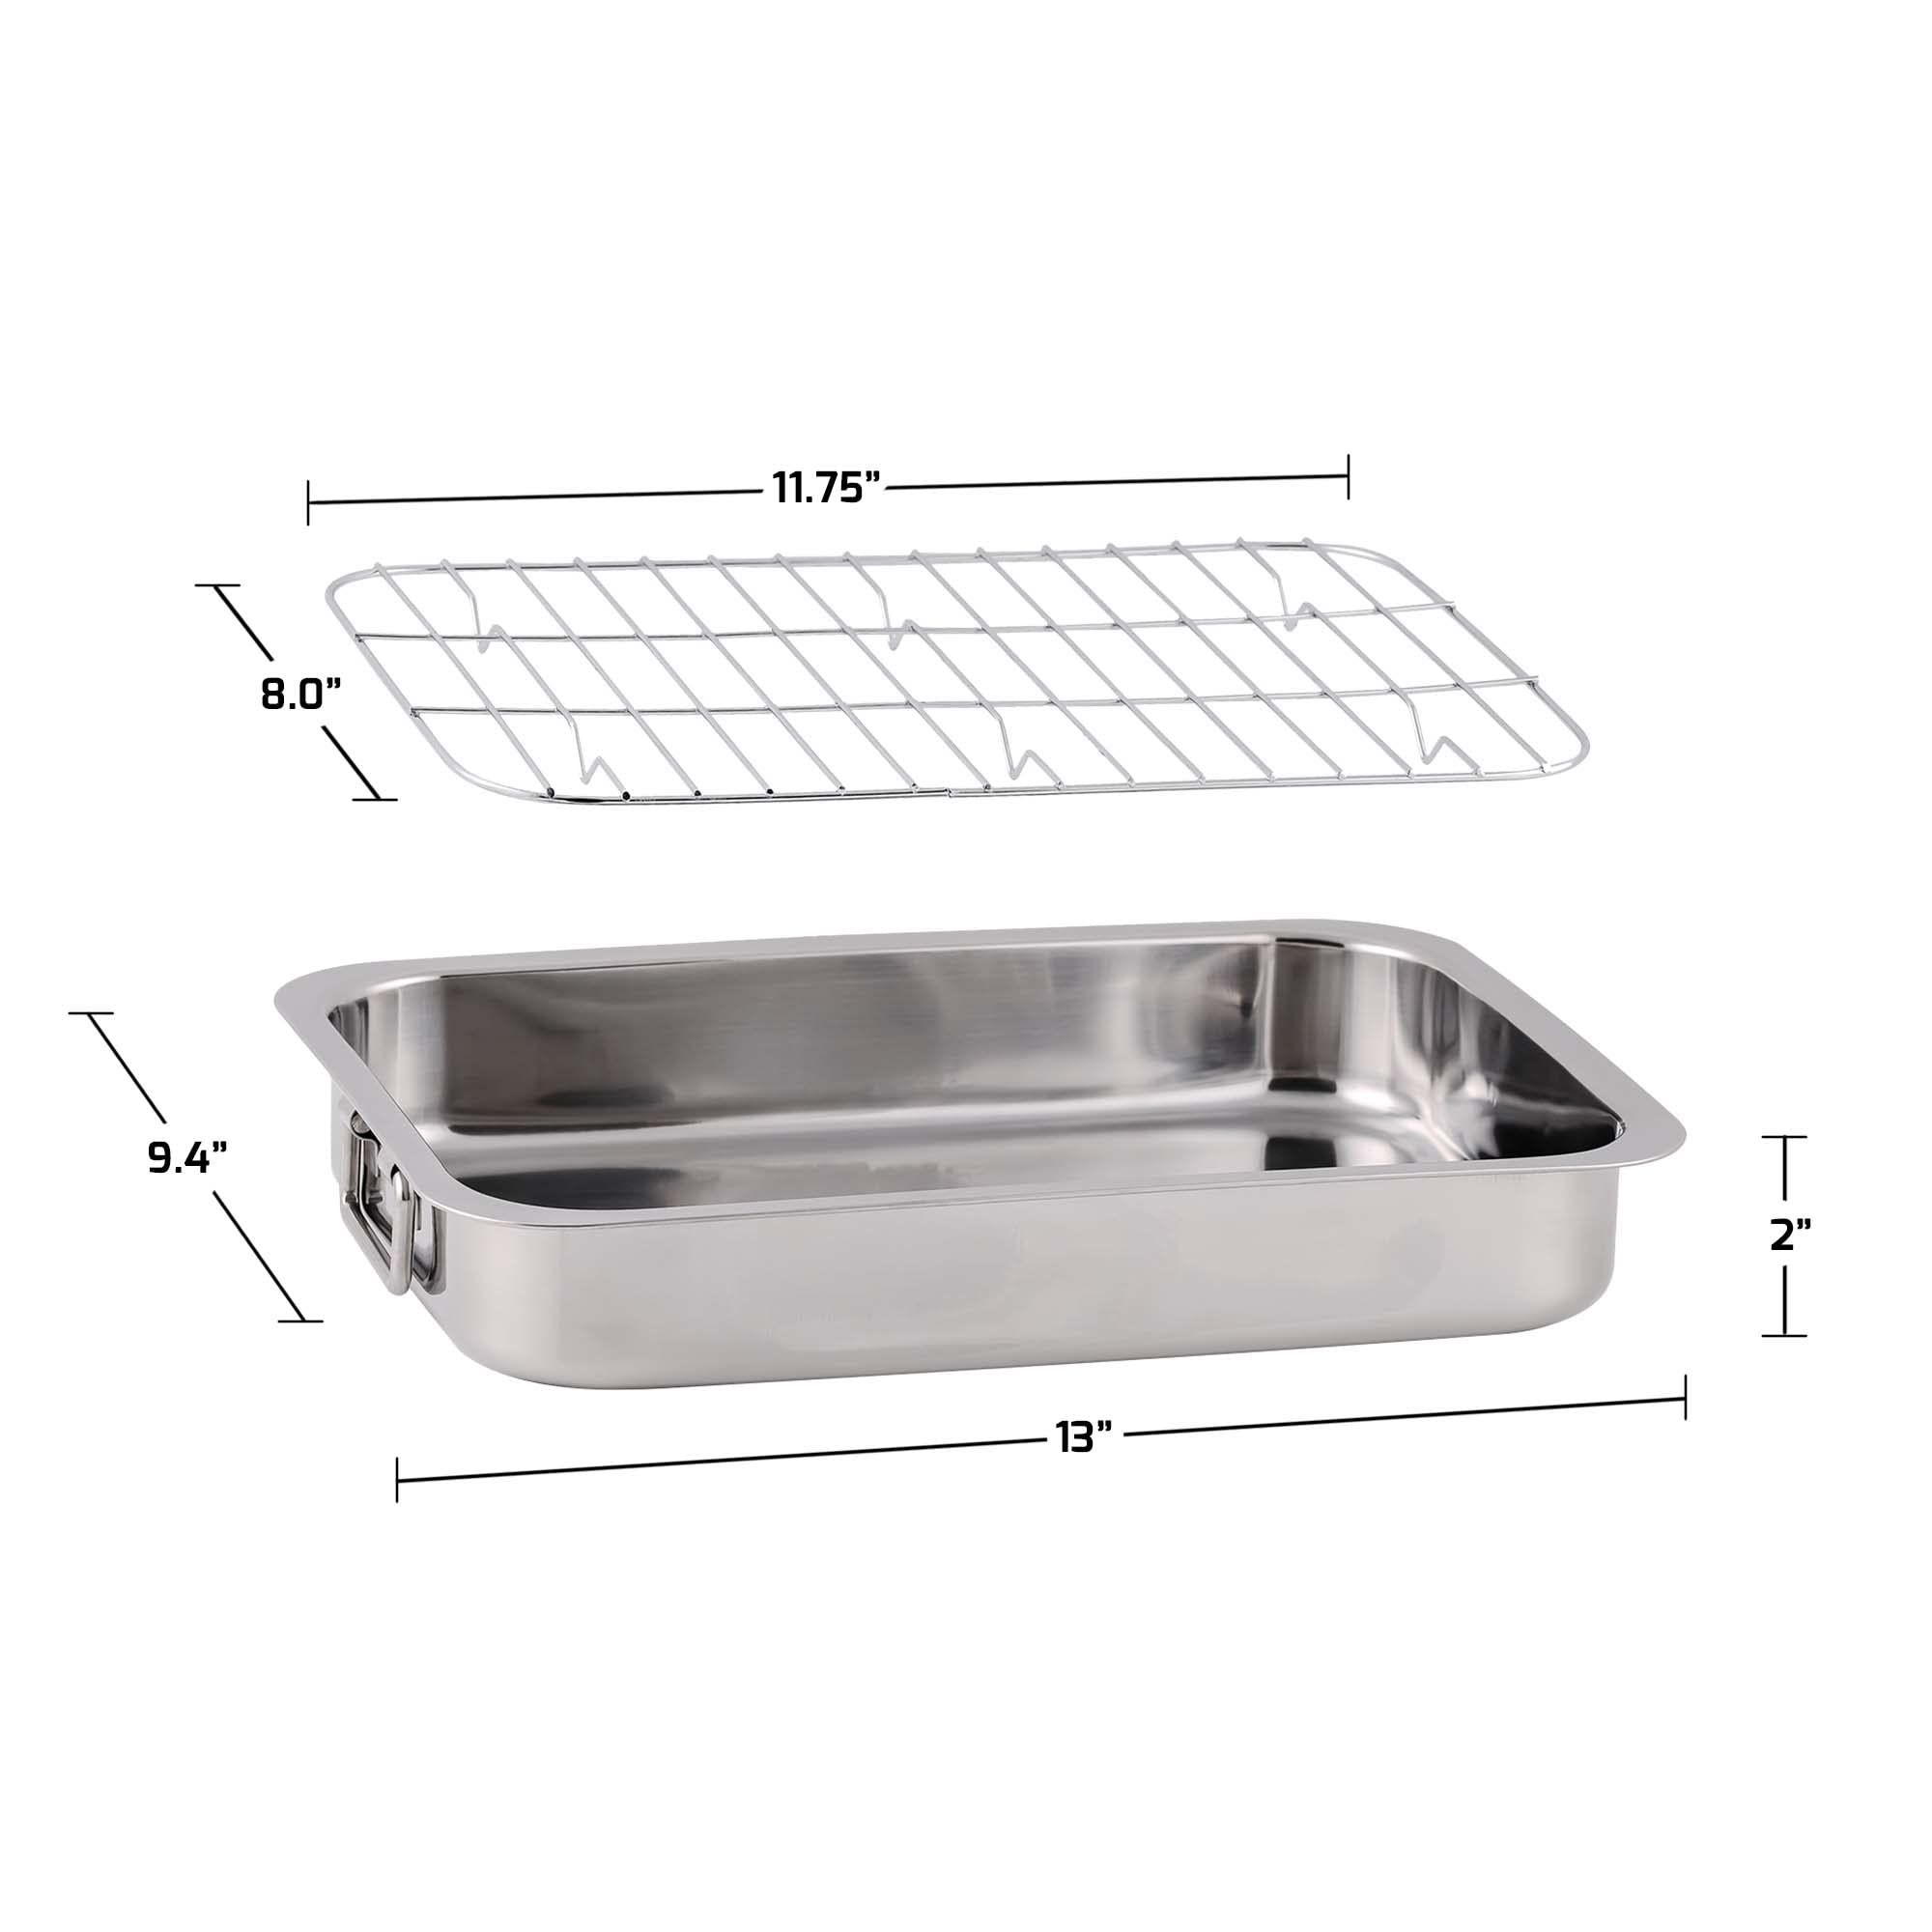 Ovente Kitchen Oven Roasting Pan 13 x 9.4 Inch Stainless Steel Portable Baking Tray with Rack and Handle, Easy to Clean Dishwasher Safe Perfect for Cooking Turkey Roast Beef Fish, Silver CWR23131S